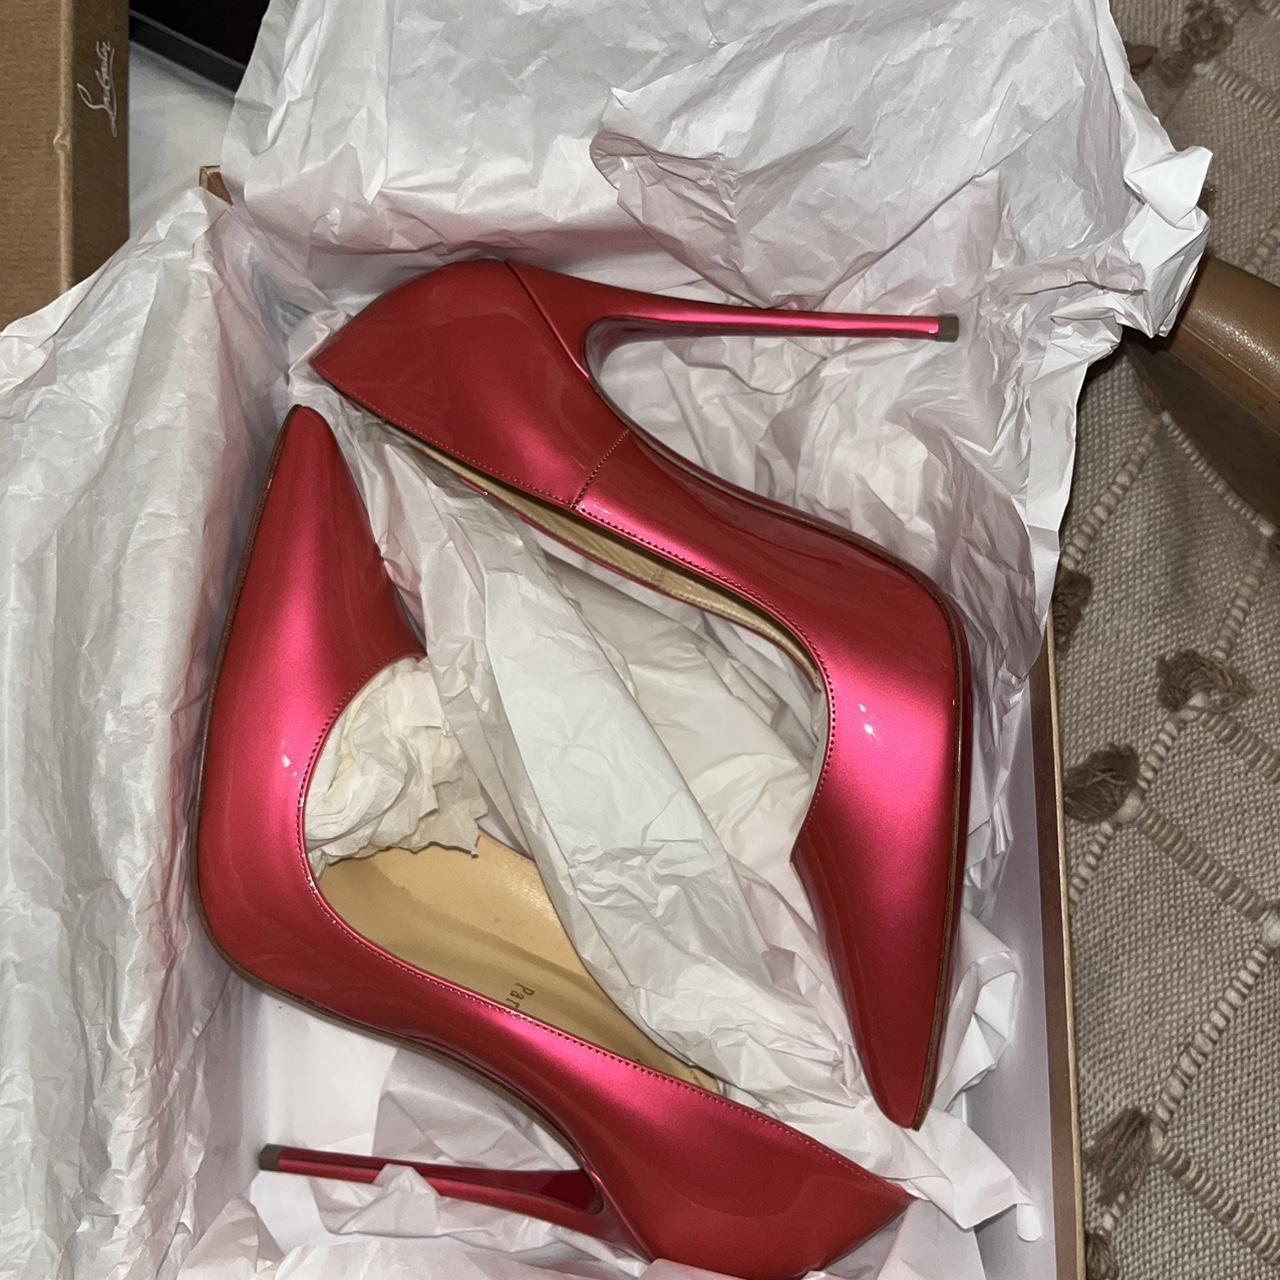 Louboutin So Kate Pink heels size 40.5 would fit a... - Depop